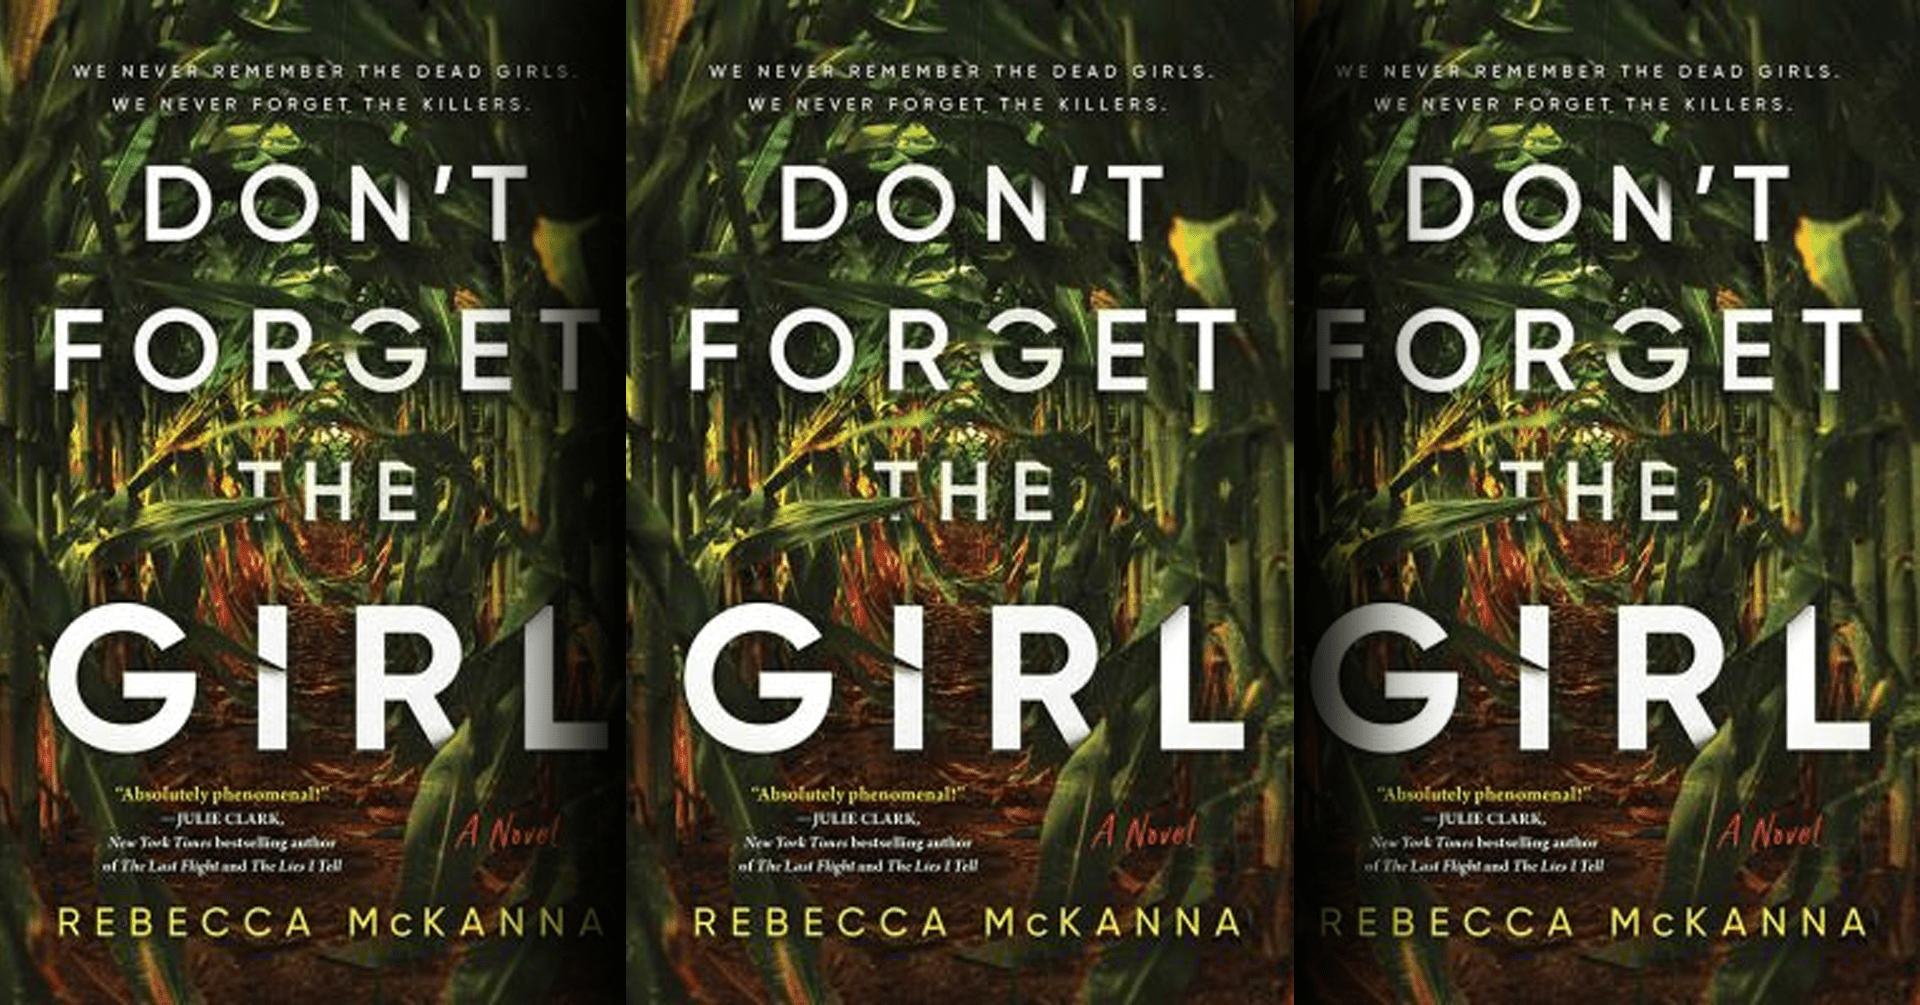 Don't Forget the Girl by Rebecca McKanna (book cover)